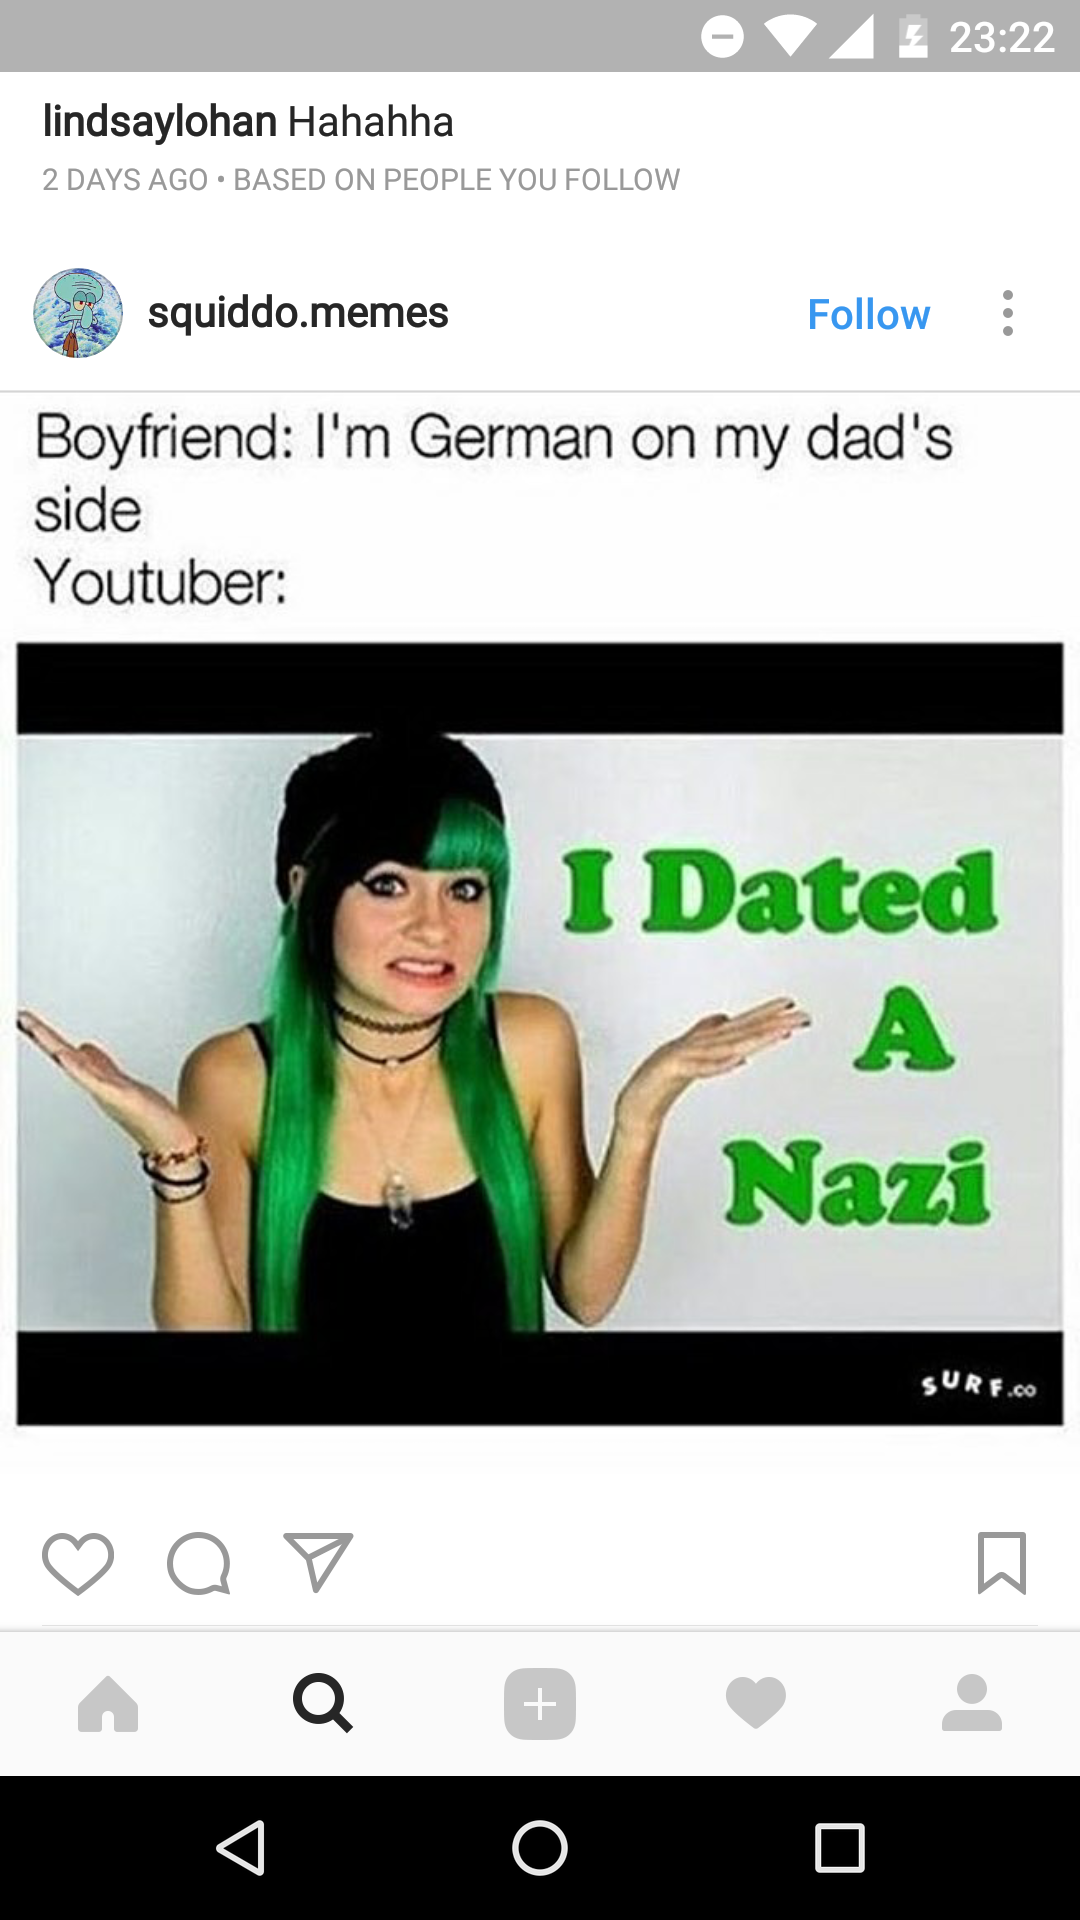 dated a nazi meme - A $ lindsaylohan Hahahha 2 Days Ago. Based On People You squiddo.memes Boyfriend I'm German on my dad's side Youtuber I Dated Nazi Qb